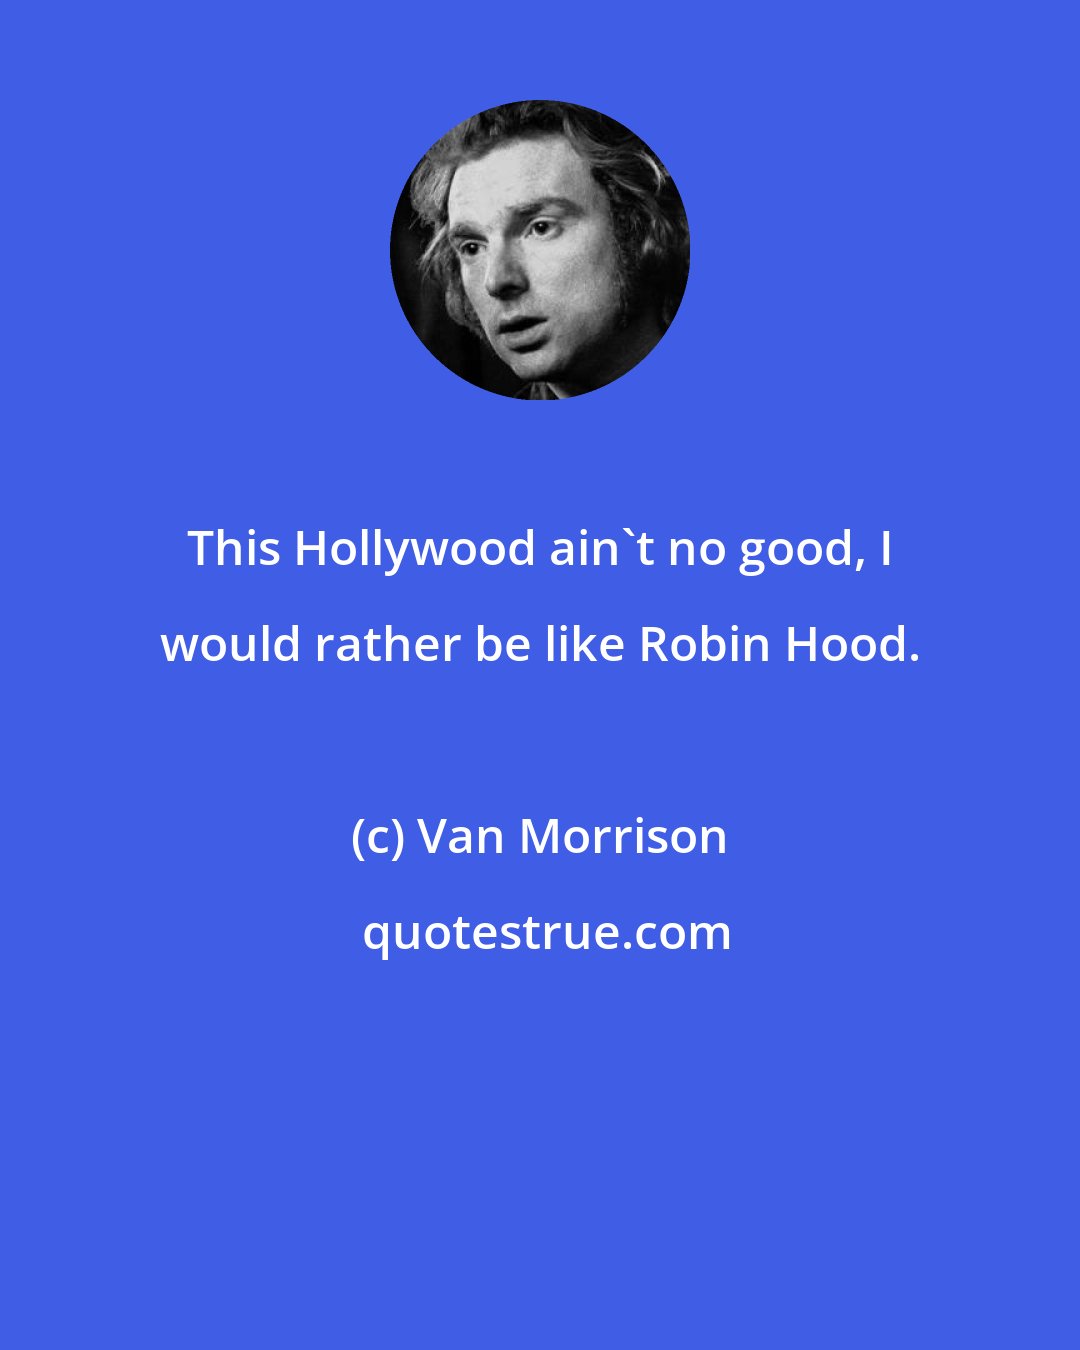 Van Morrison: This Hollywood ain't no good, I would rather be like Robin Hood.